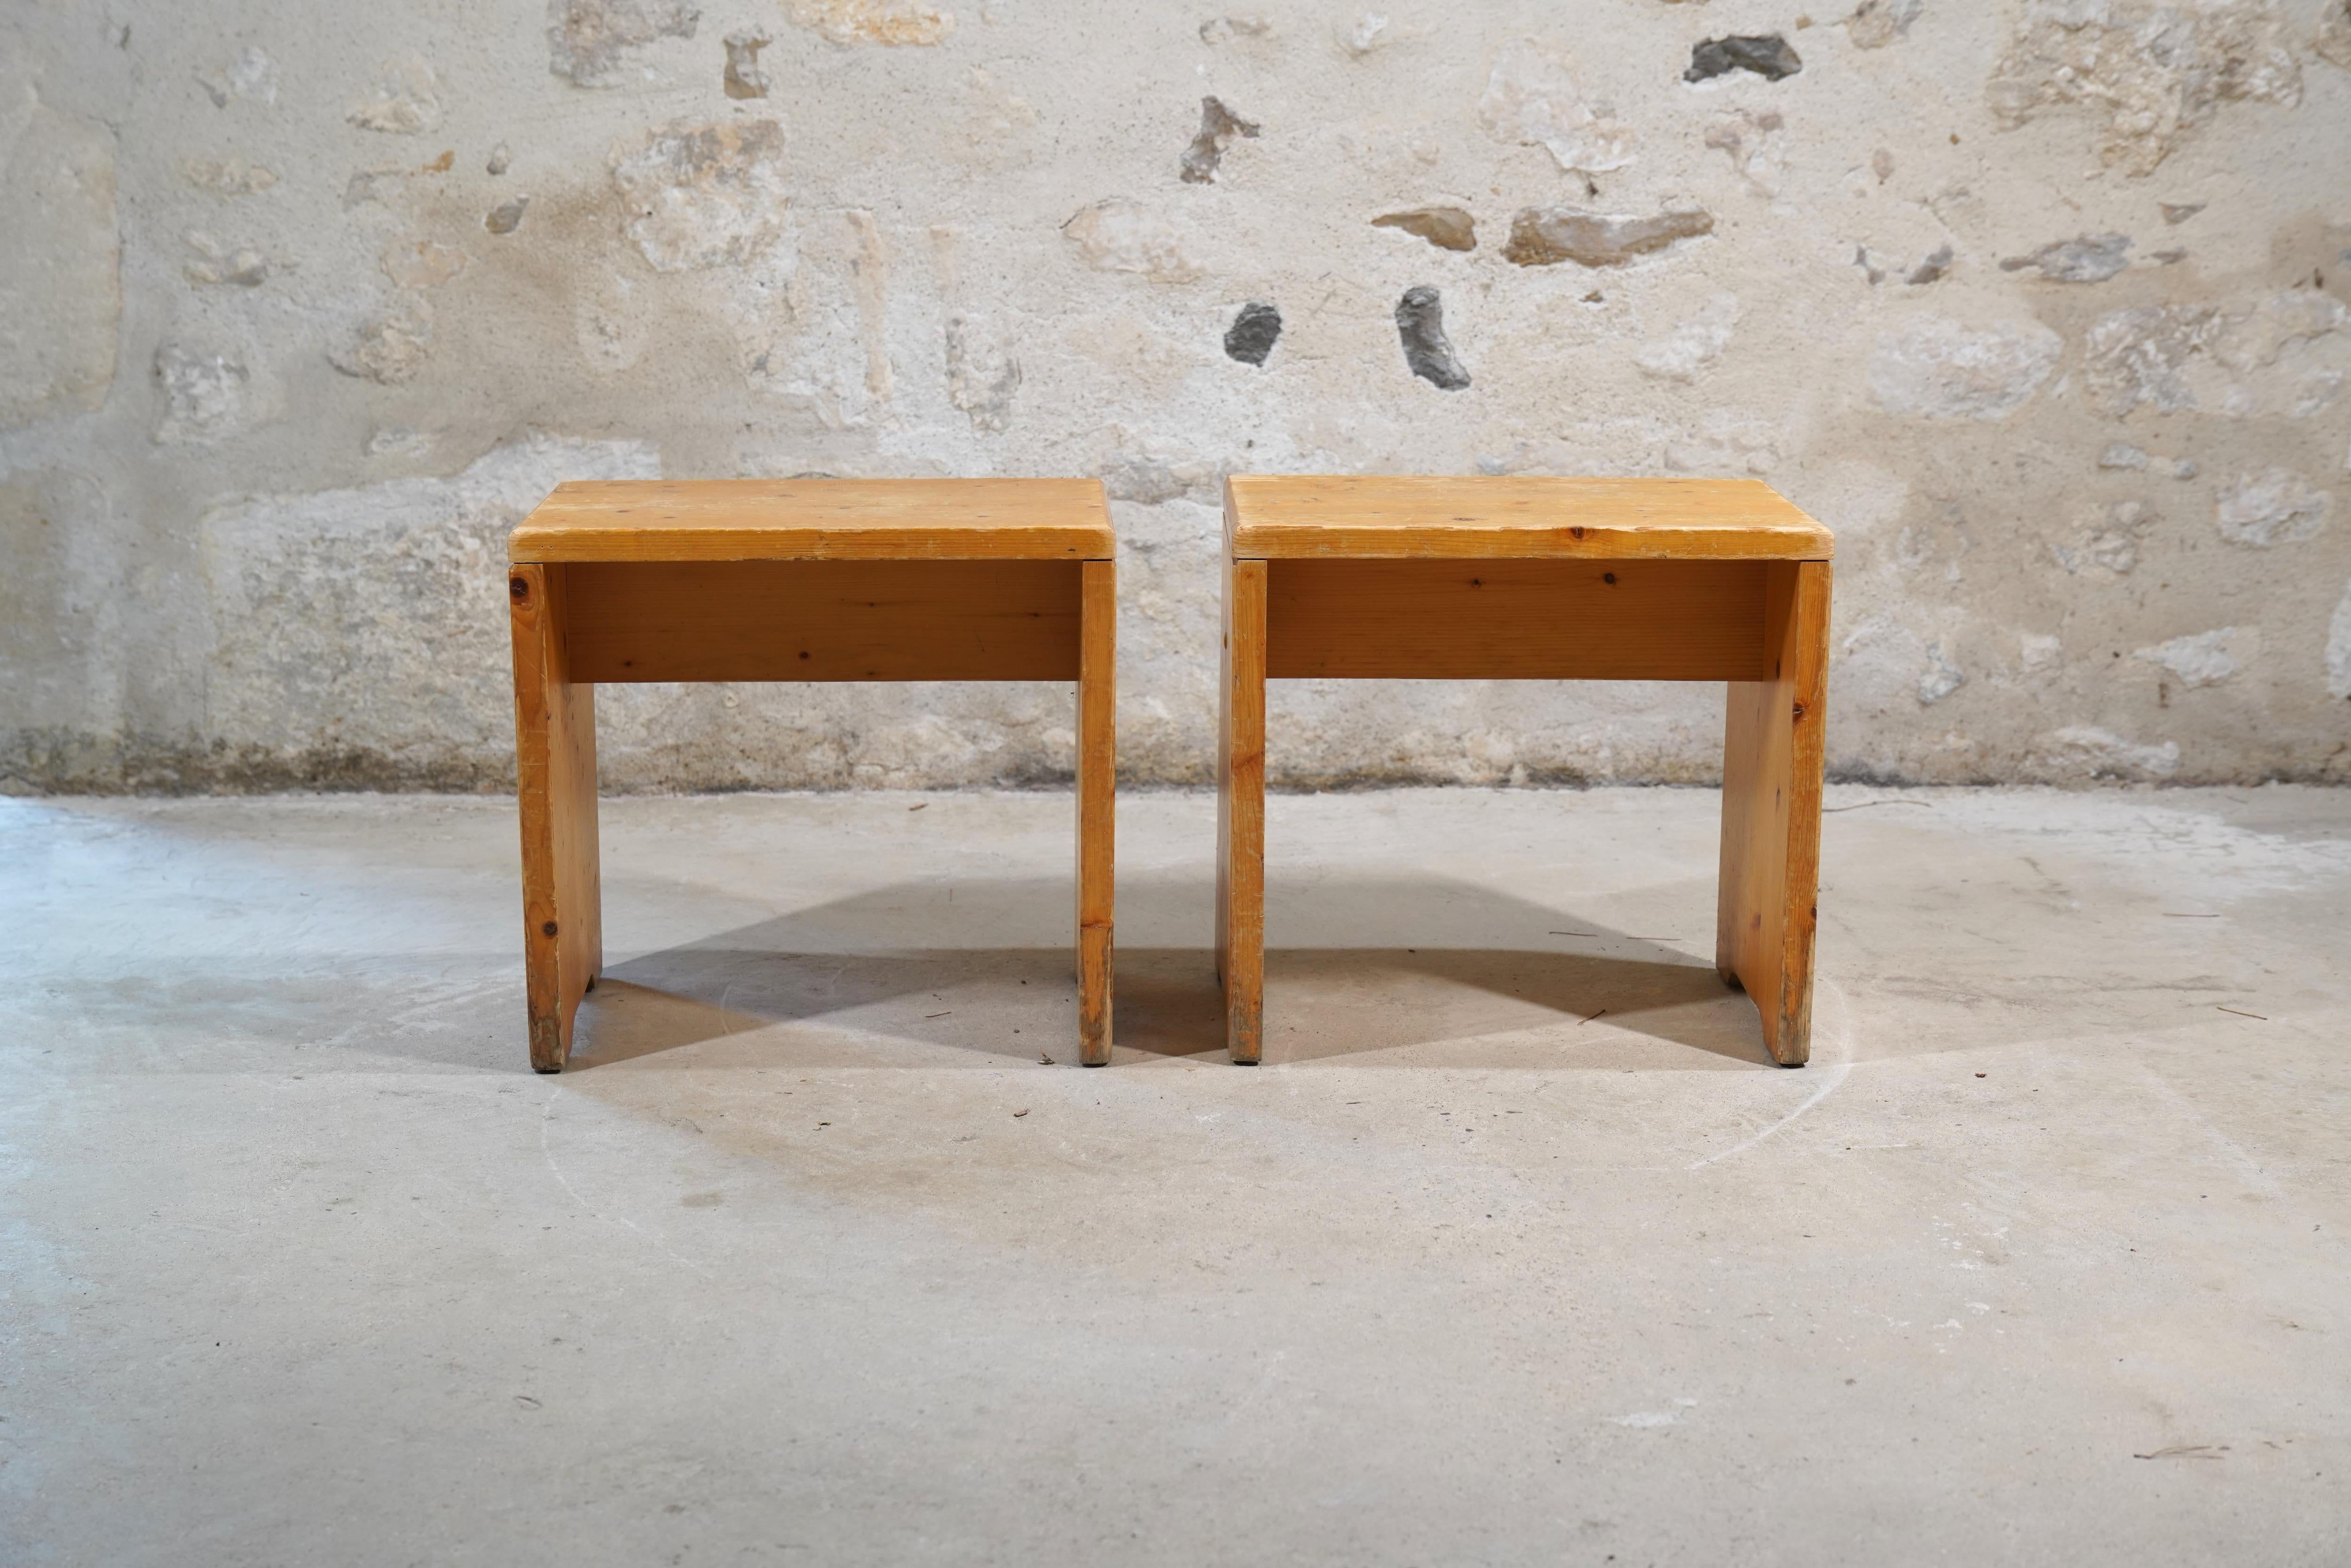 Pine Charlotte Perriand Stools from Les Arcs, France circa 1968 (4 Available) For Sale